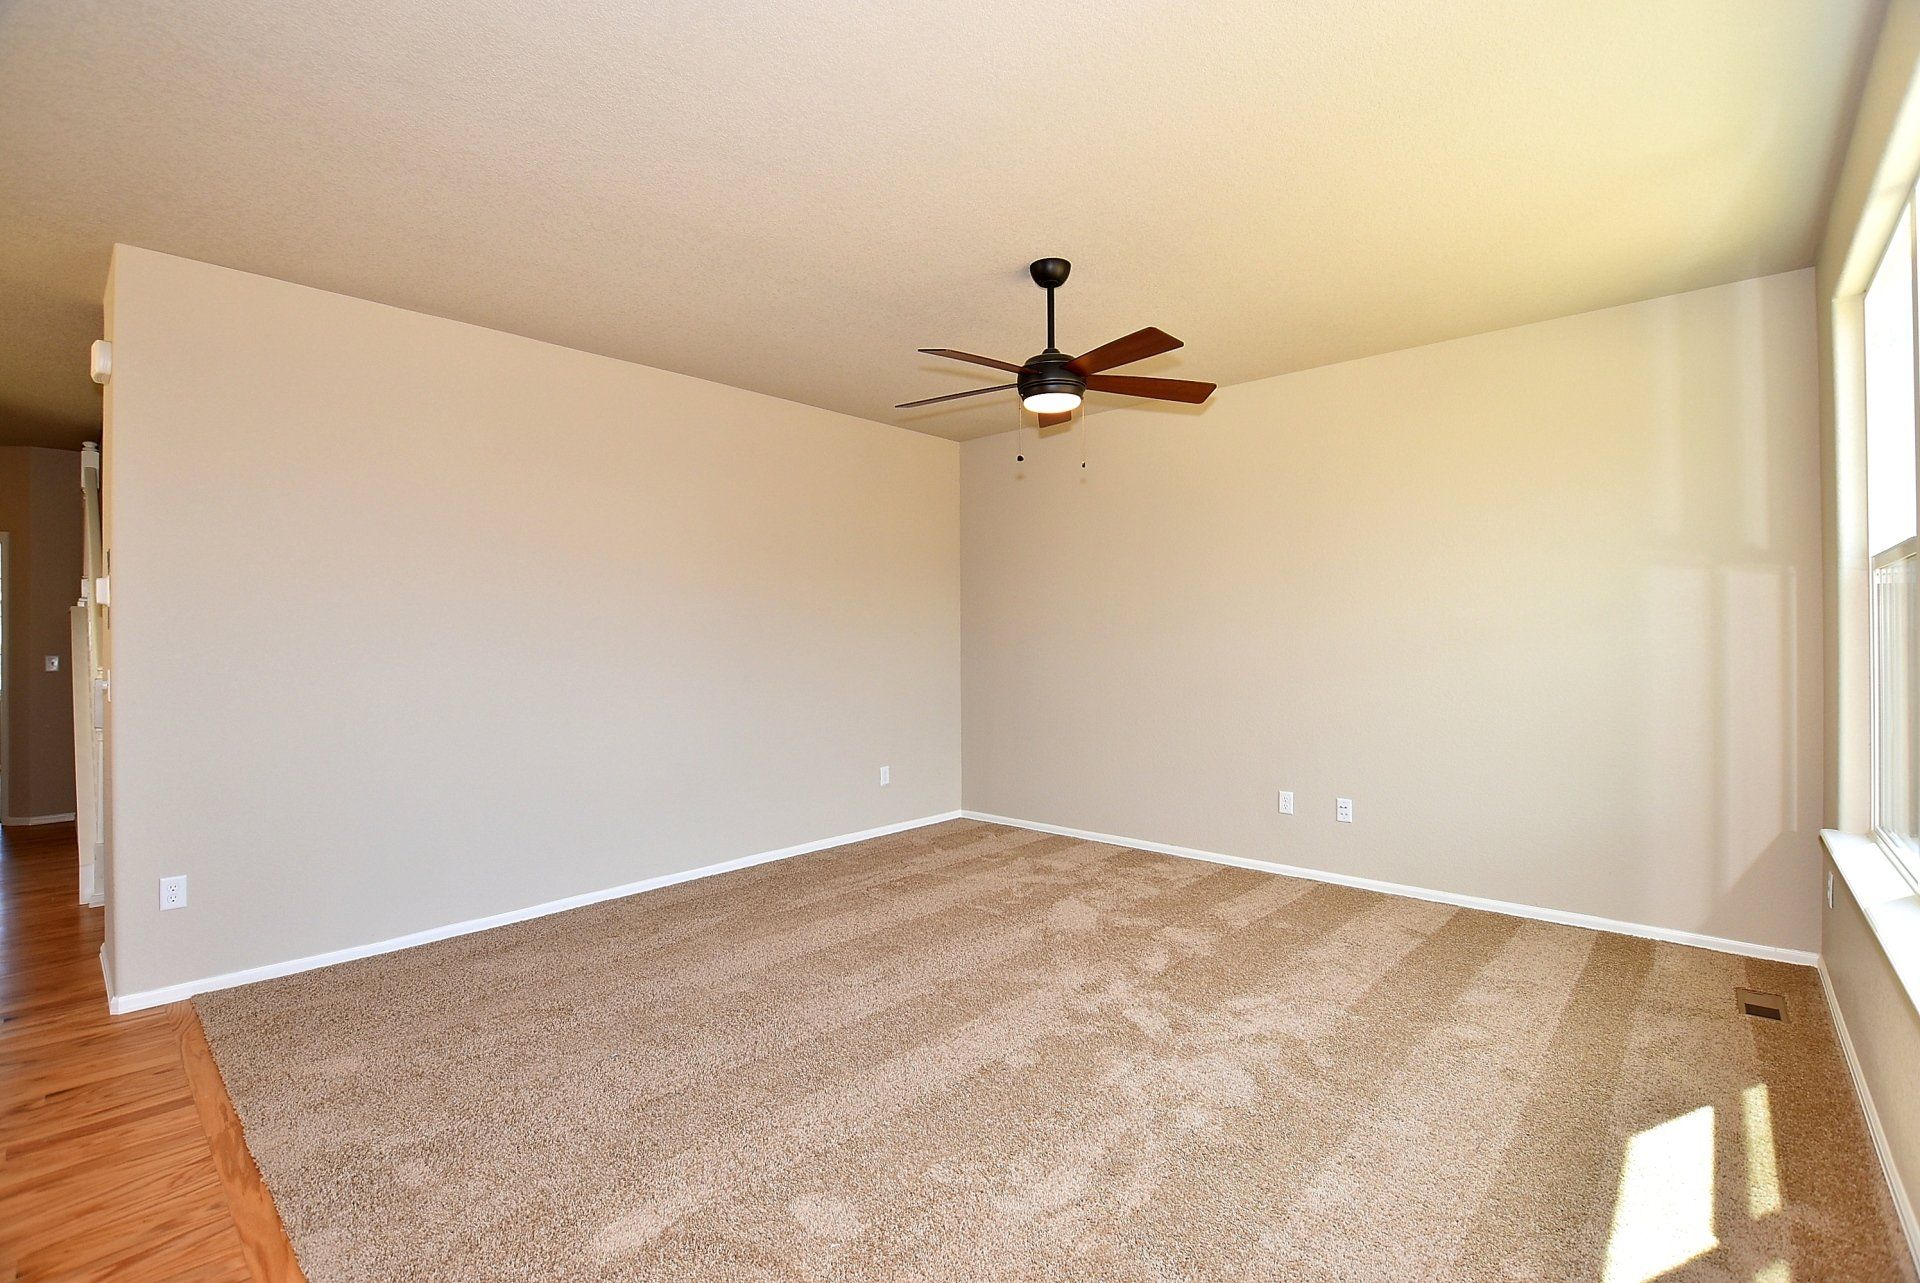 Room with wooden floors and ceiling fan